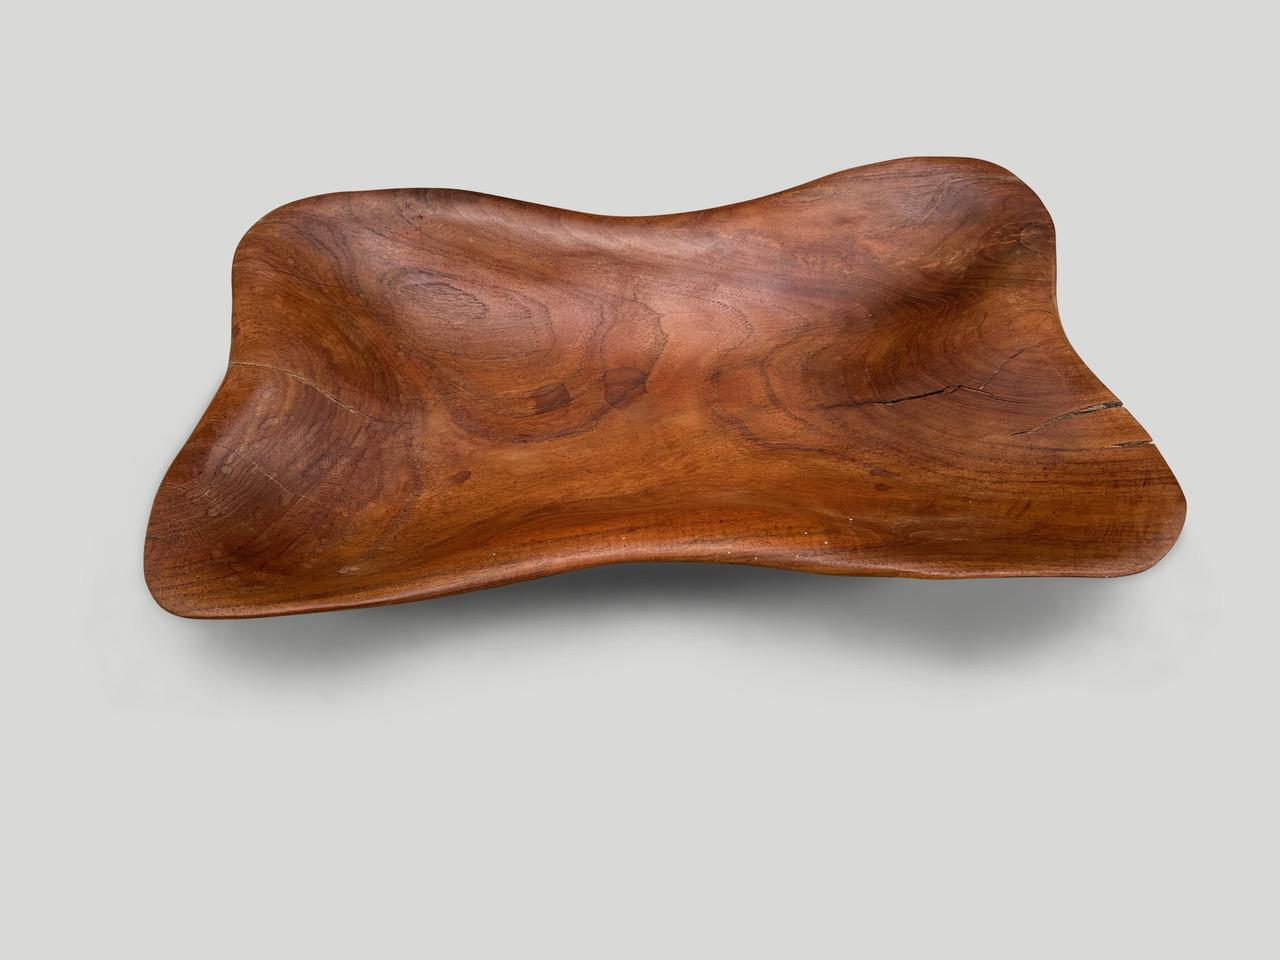 Minimalist teak platter or bowl hand carved from a single piece of reclaimed teak wood. Finished with a natural oil revealing the beautiful wood grain.

This bowl or platter was sourced in the spirit of wabi-sabi, a Japanese philosophy that beauty